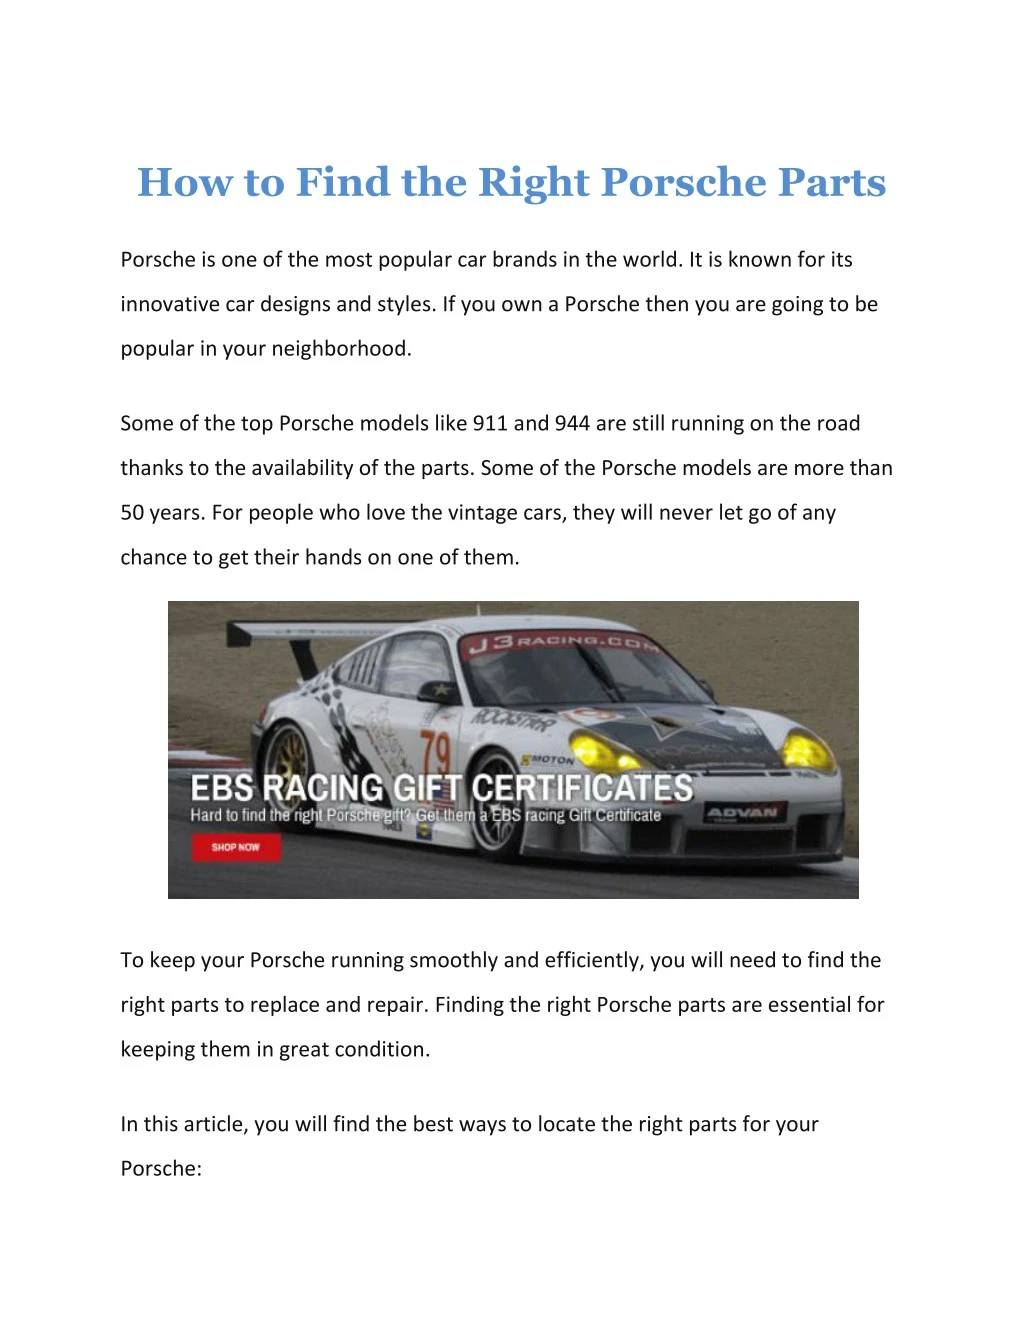 how to find the right porsche parts